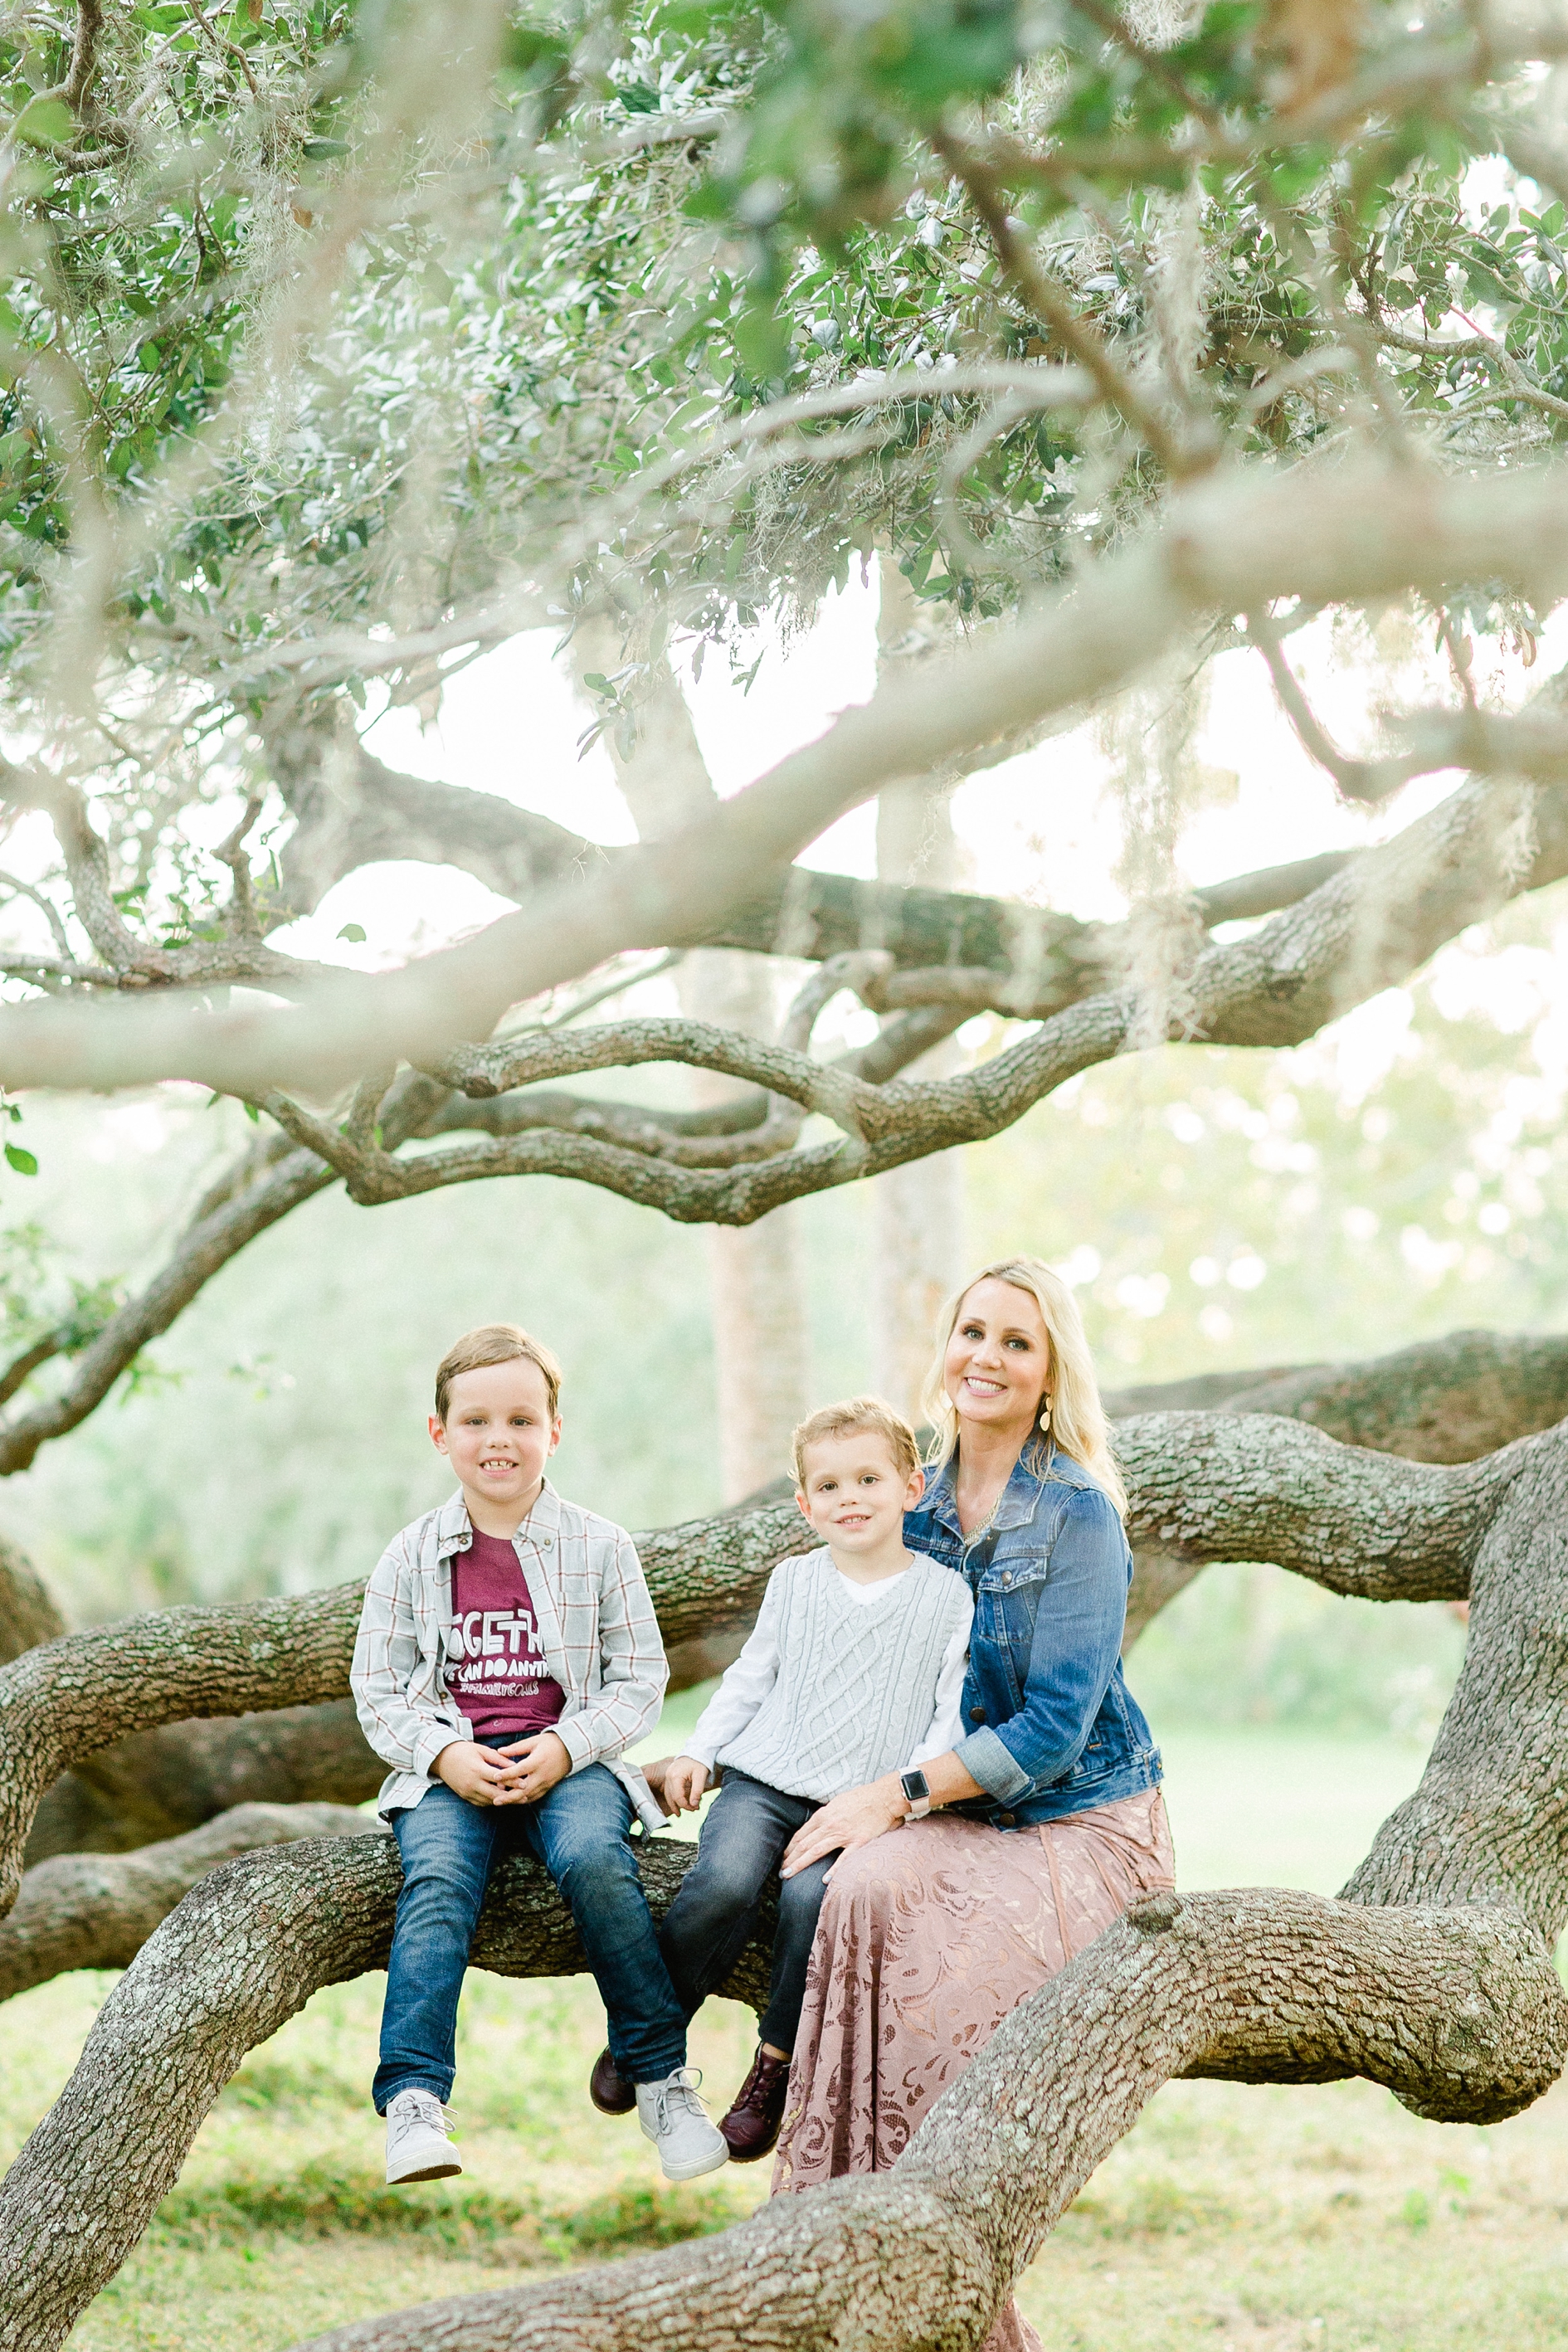 Tampa Family Photographer | © Ailyn La Torre Photography 2017